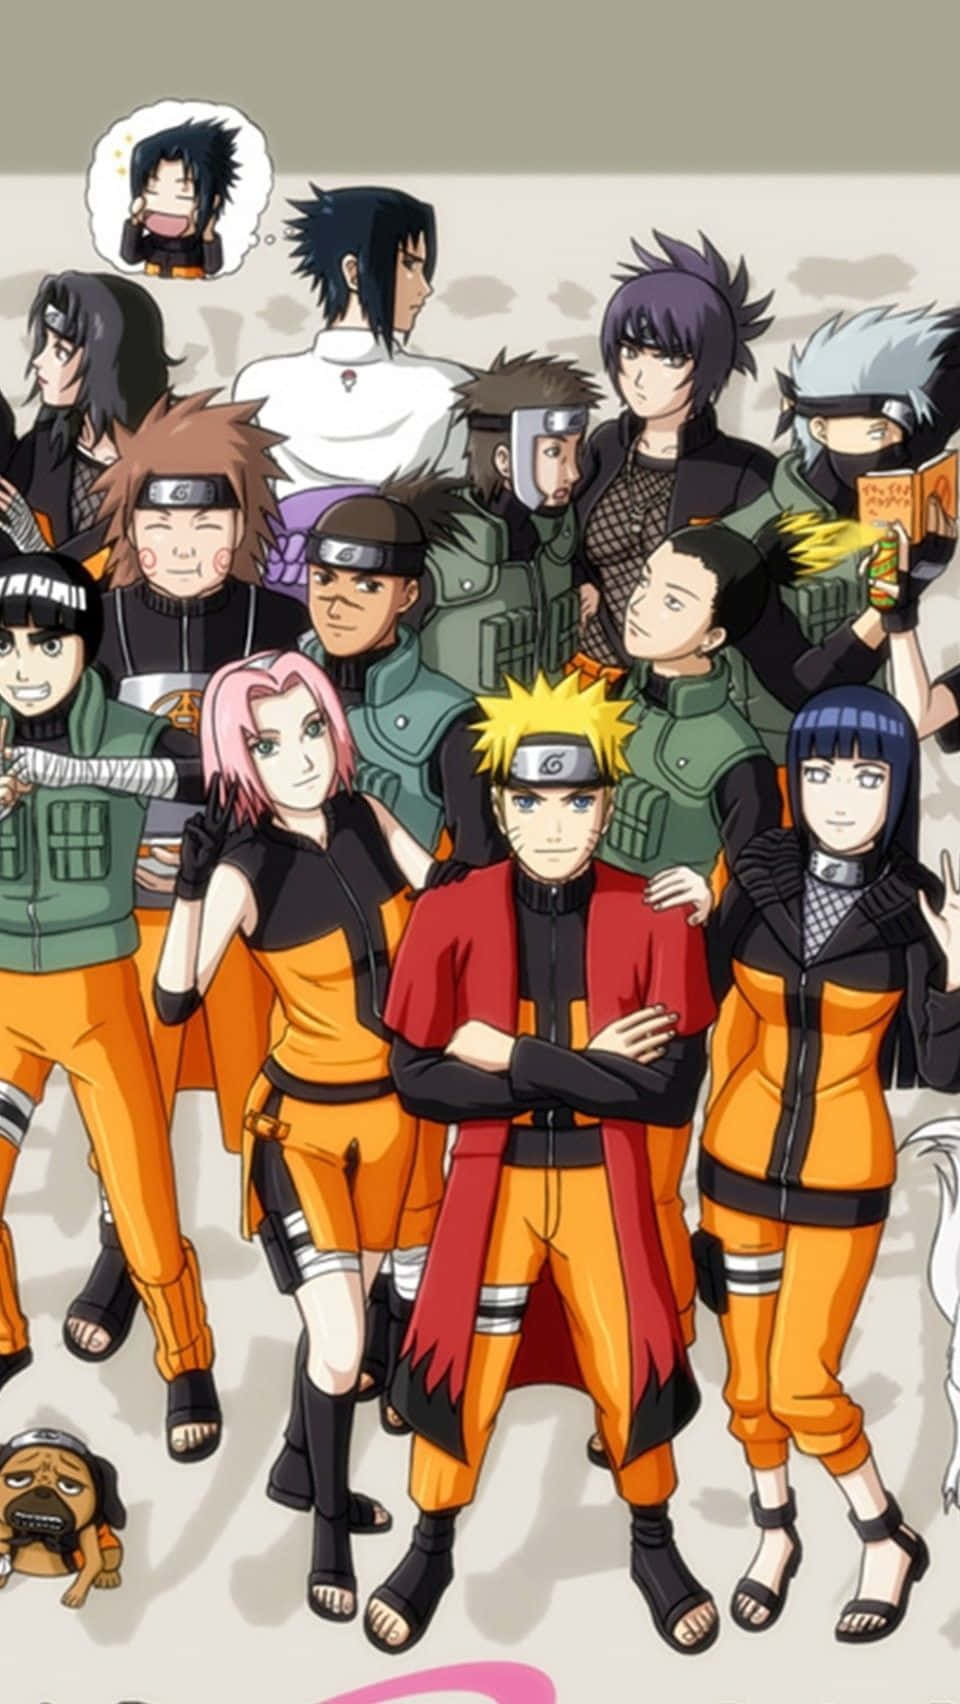 Get the latest Naruto Shippuden wallpaper for your iPhone Wallpaper